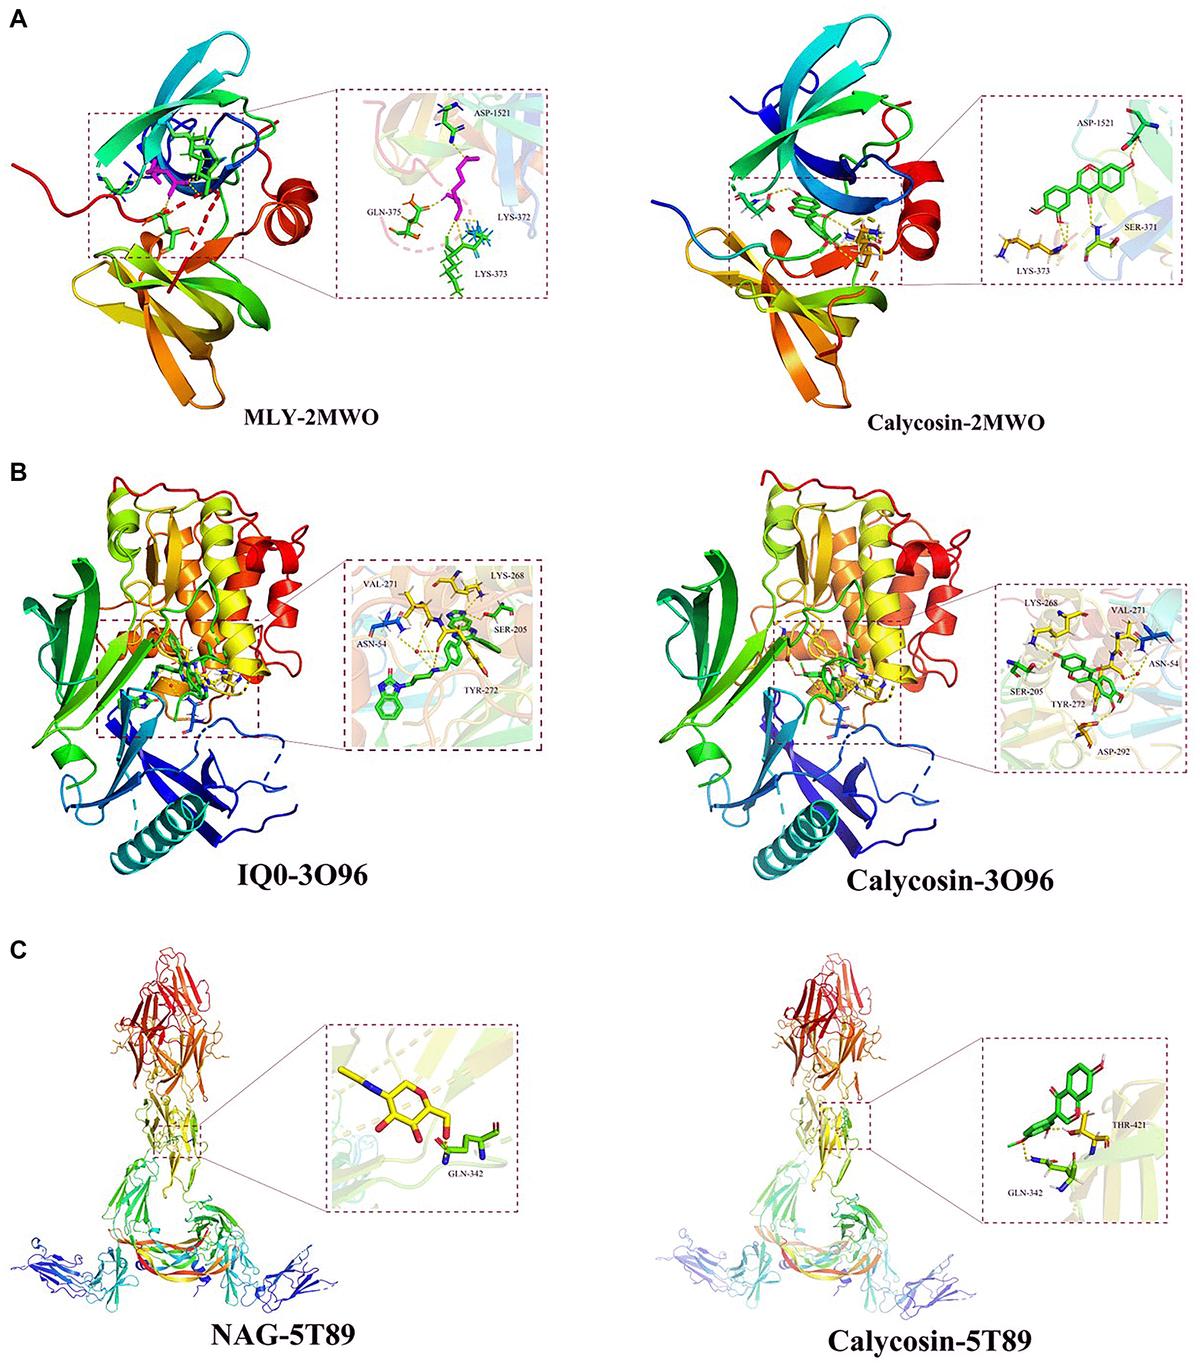 Docking poses of calycosin on three identified targets. By using molecular docking analysis, the data demonstrated that effective binding capacities of calycosin with CIRI were identified in (A) TP53 (2MWO), (B) AKT1 (3O96), and (C) VEGFA (5T89) targets.